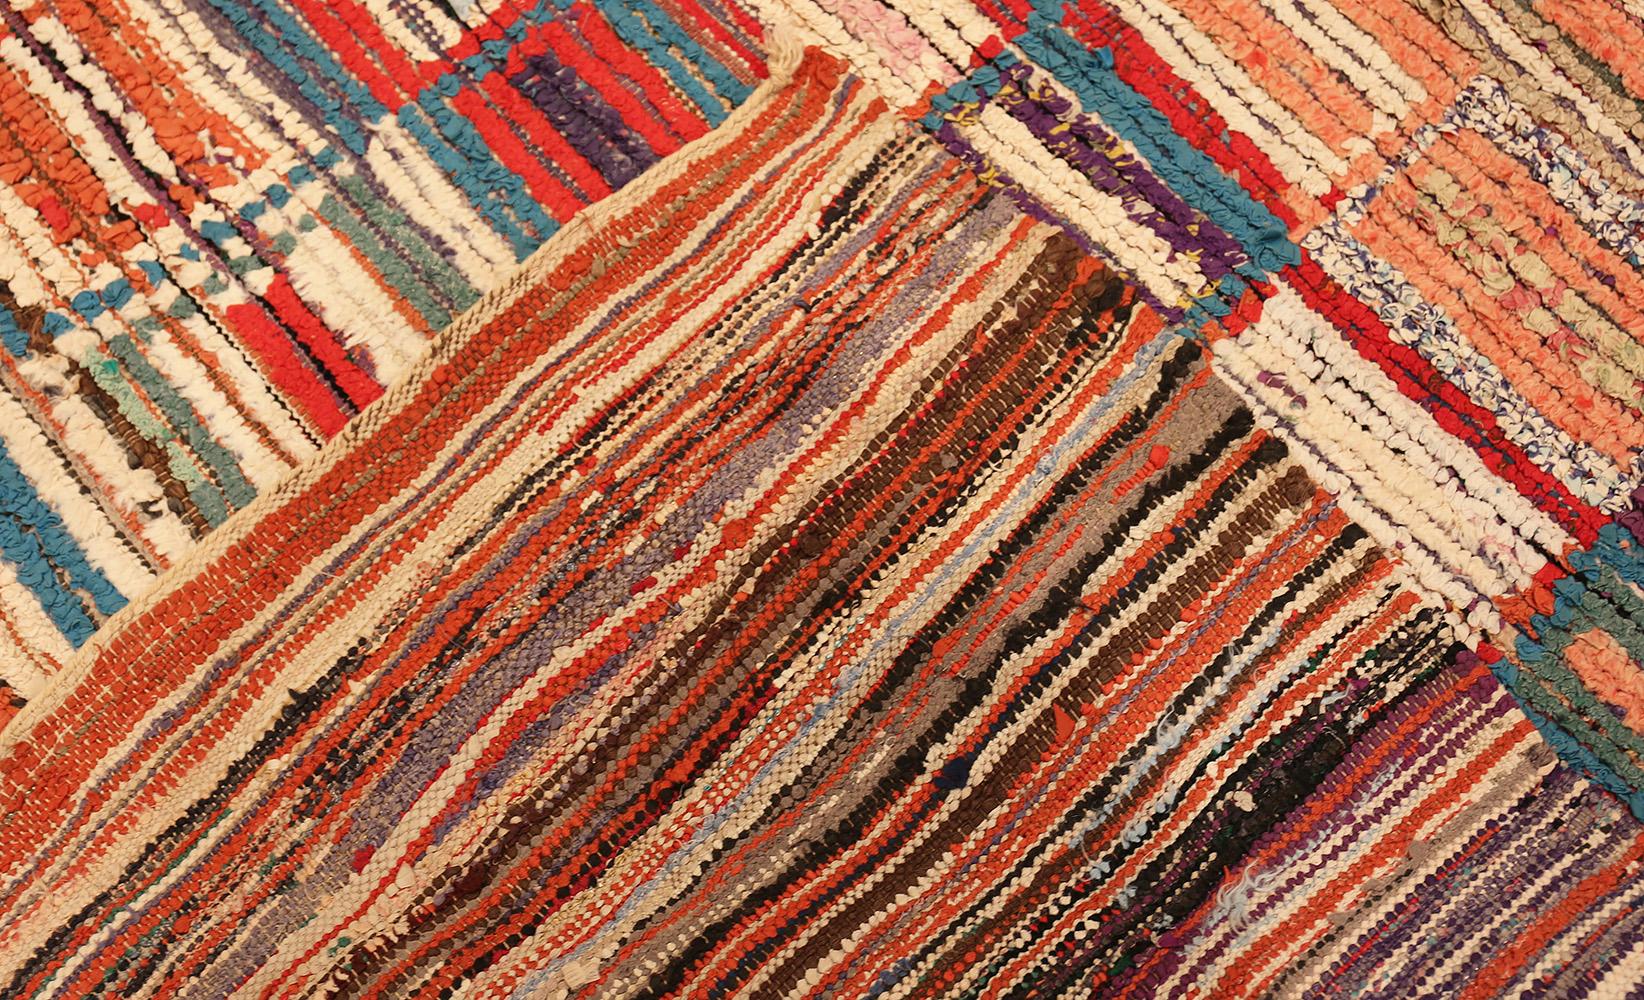 20th Century Vintage Mid-Century Moroccan Rag Rug. Size: 3 ft 10 in x 8 ft 8 in